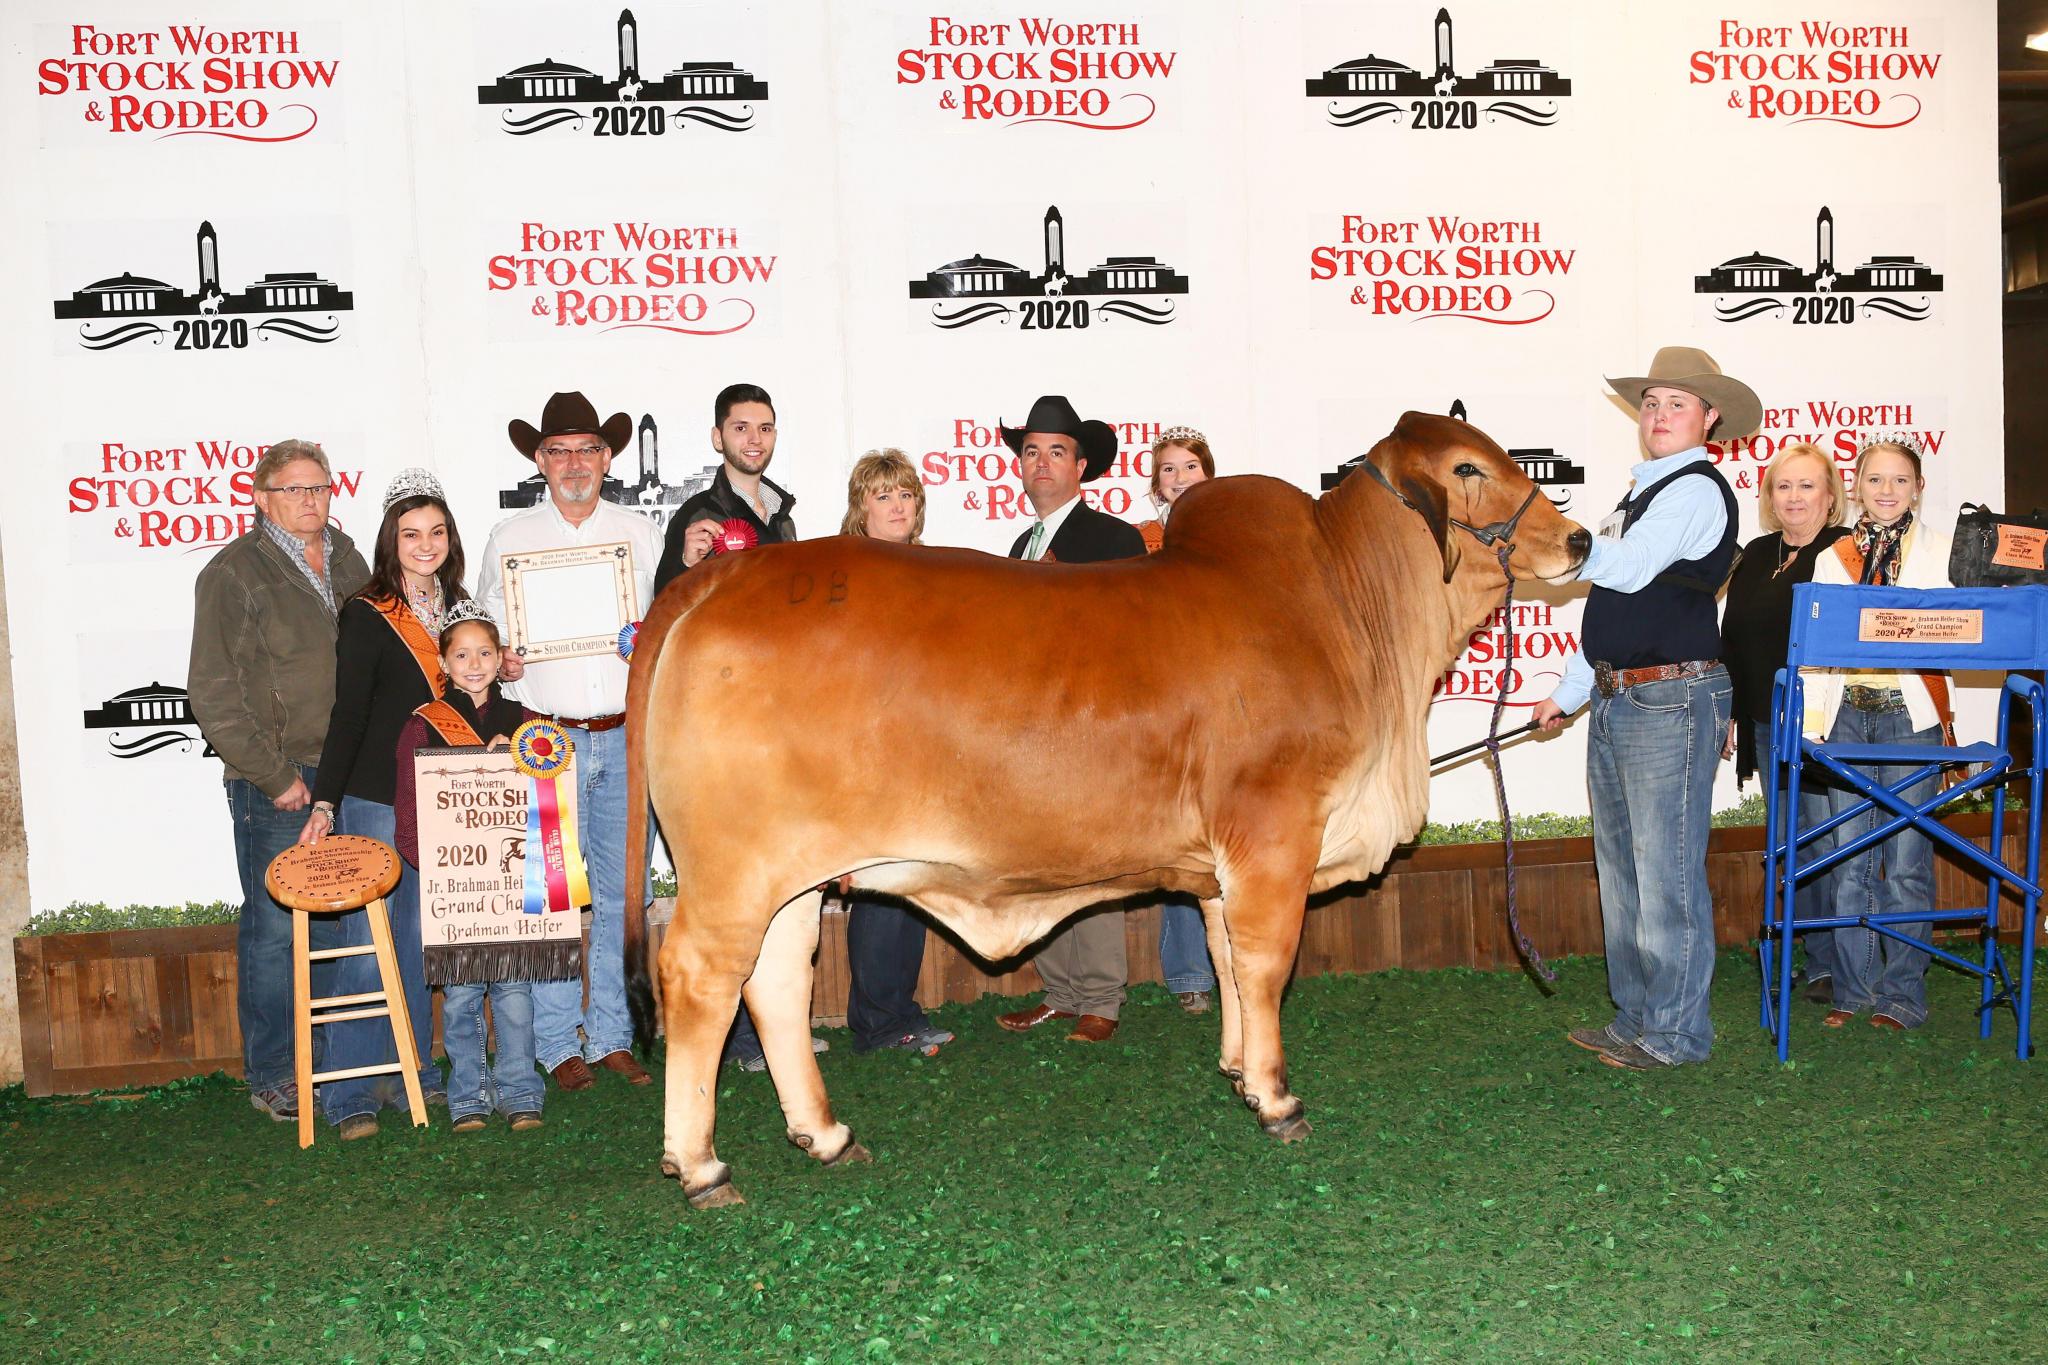 Chilton 4-H member Collin Kyle Parker captured Senior Champion Heifer and Grand Champion Heifer with DB Southern Style 1/553 in the Junior Brahman Heifer Show at the 2020 Fort Worth Stock Show &amp; Rodeo on Jan. 27.